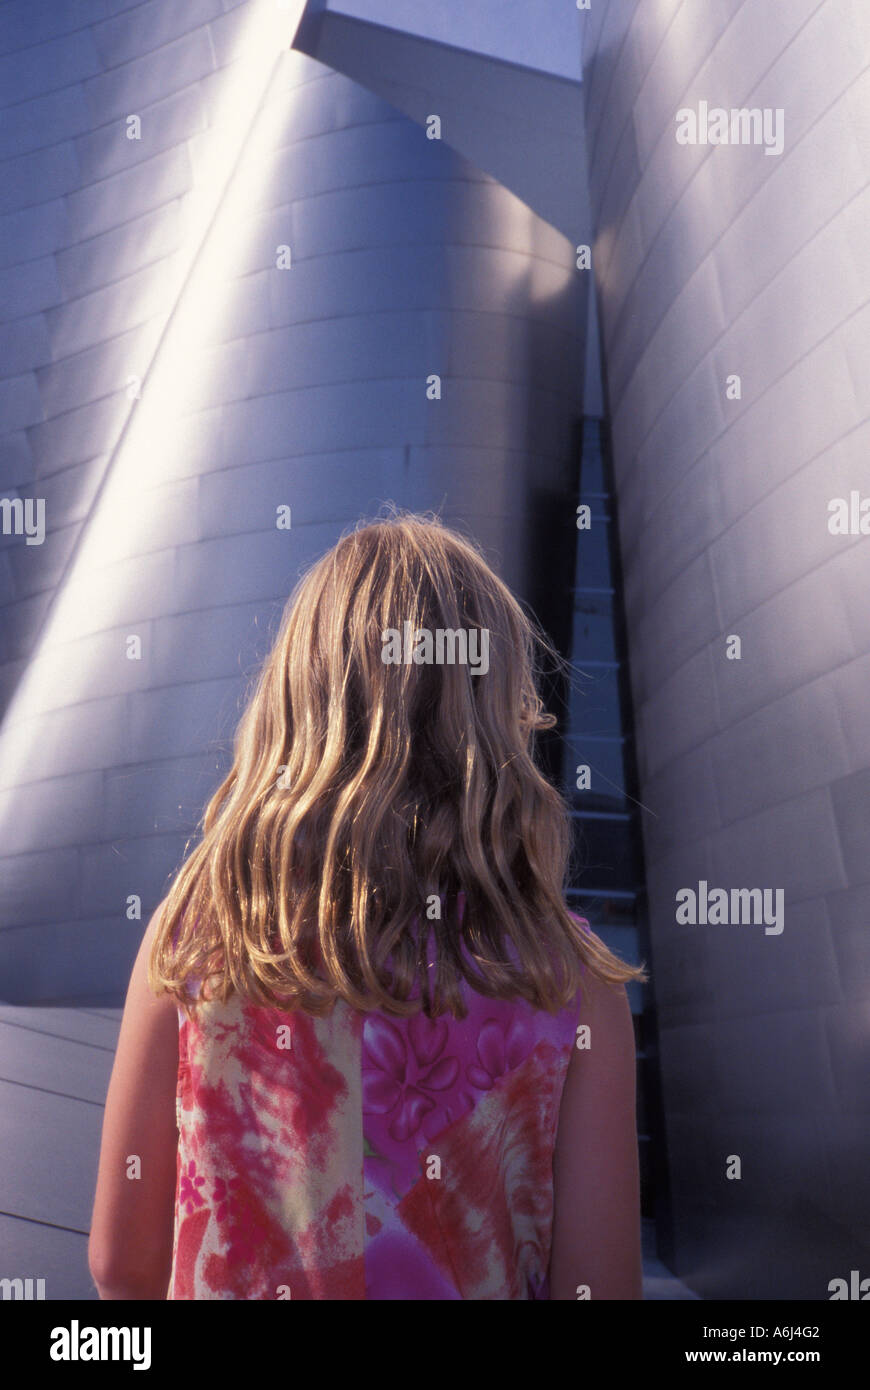 A young girl at Walt Disney Concert Hall Los Angeles California United States Stock Photo